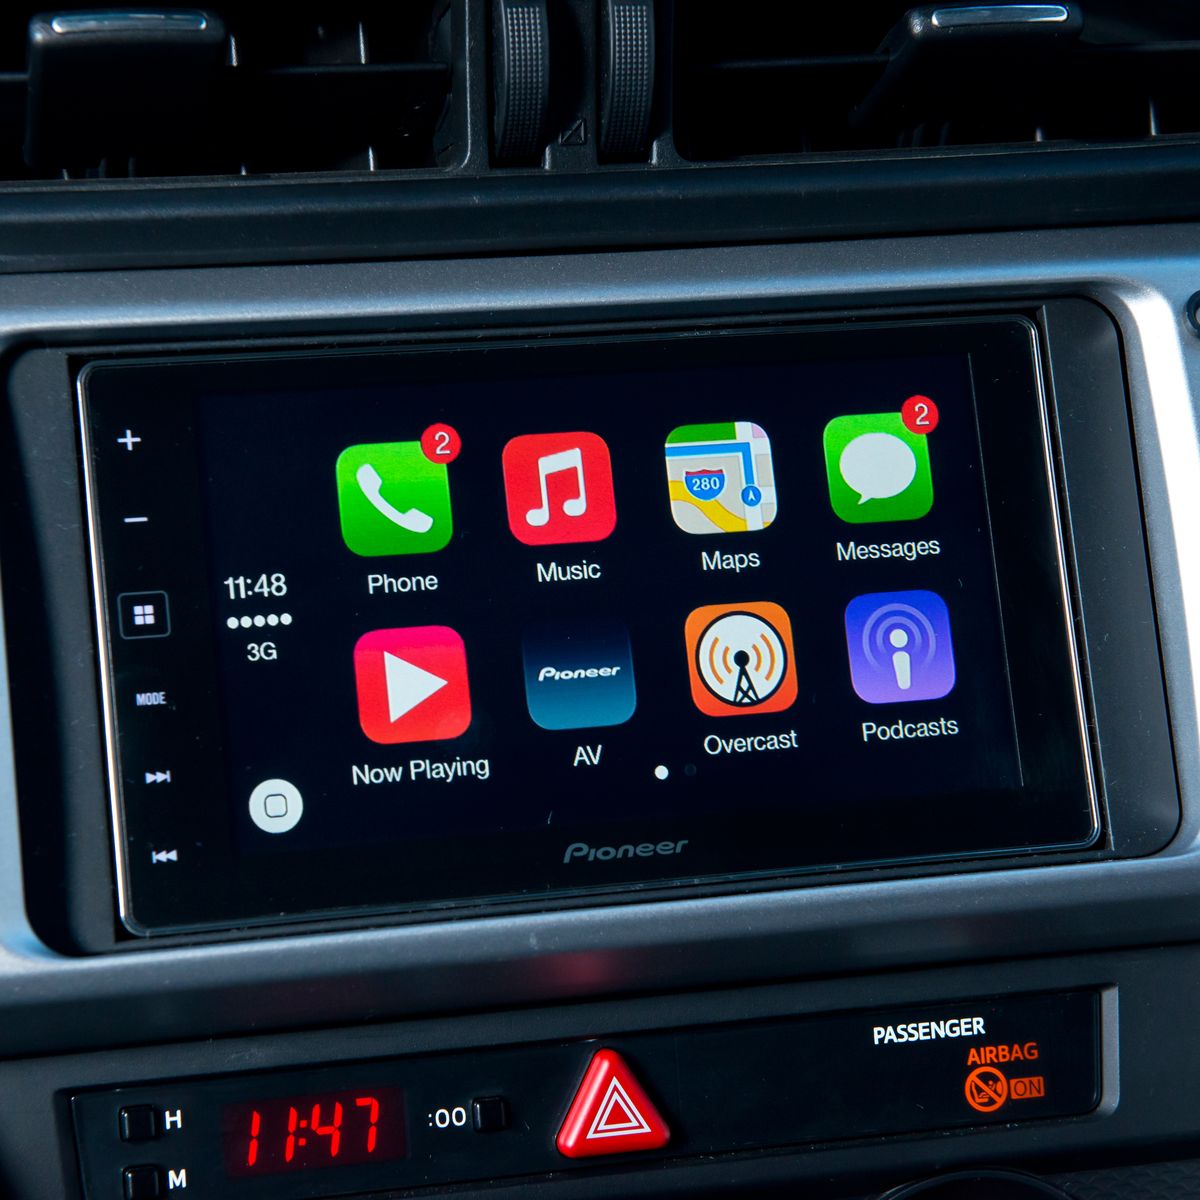 https://hips.hearstapps.com/hmg-prod/images/detail-of-a-pioneer-head-unit-fitted-in-a-subaru-brz-news-photo-1635968022.jpg?crop=0.66748xw:1xh;center,top&resize=1200:*